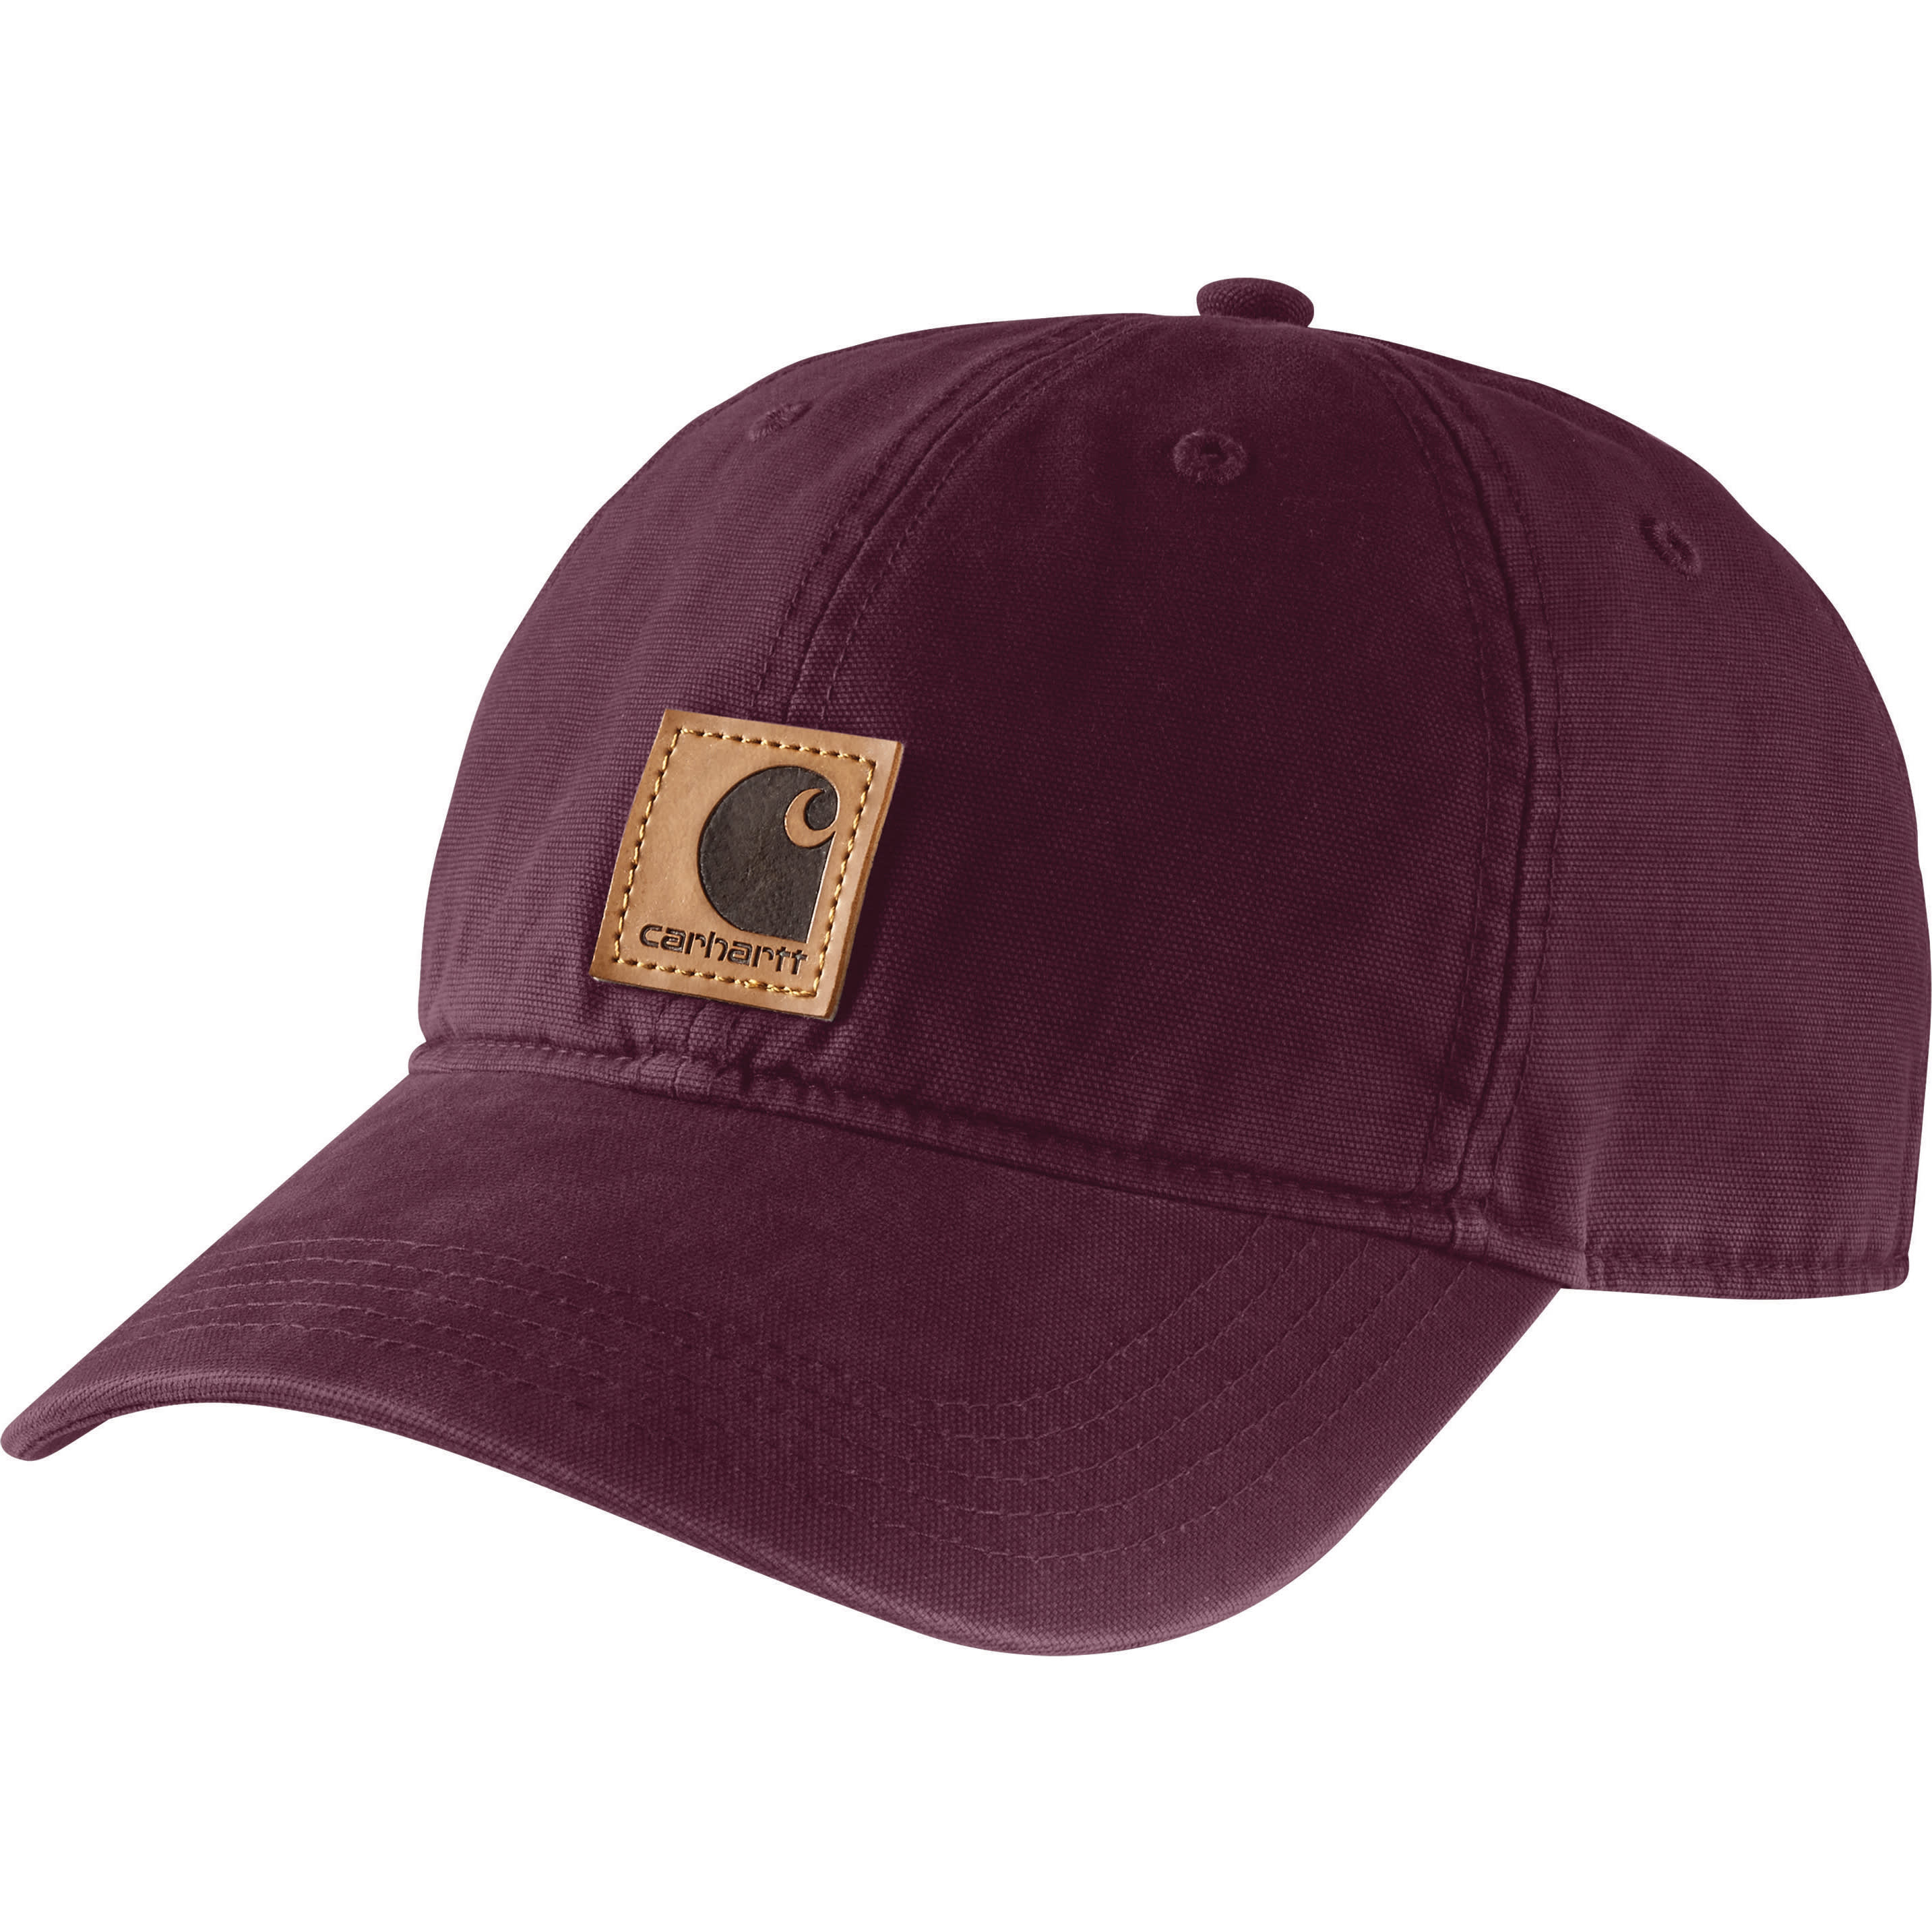 Men's Canvas Utility Cap With Side Pocket and Pre-Curved Bill